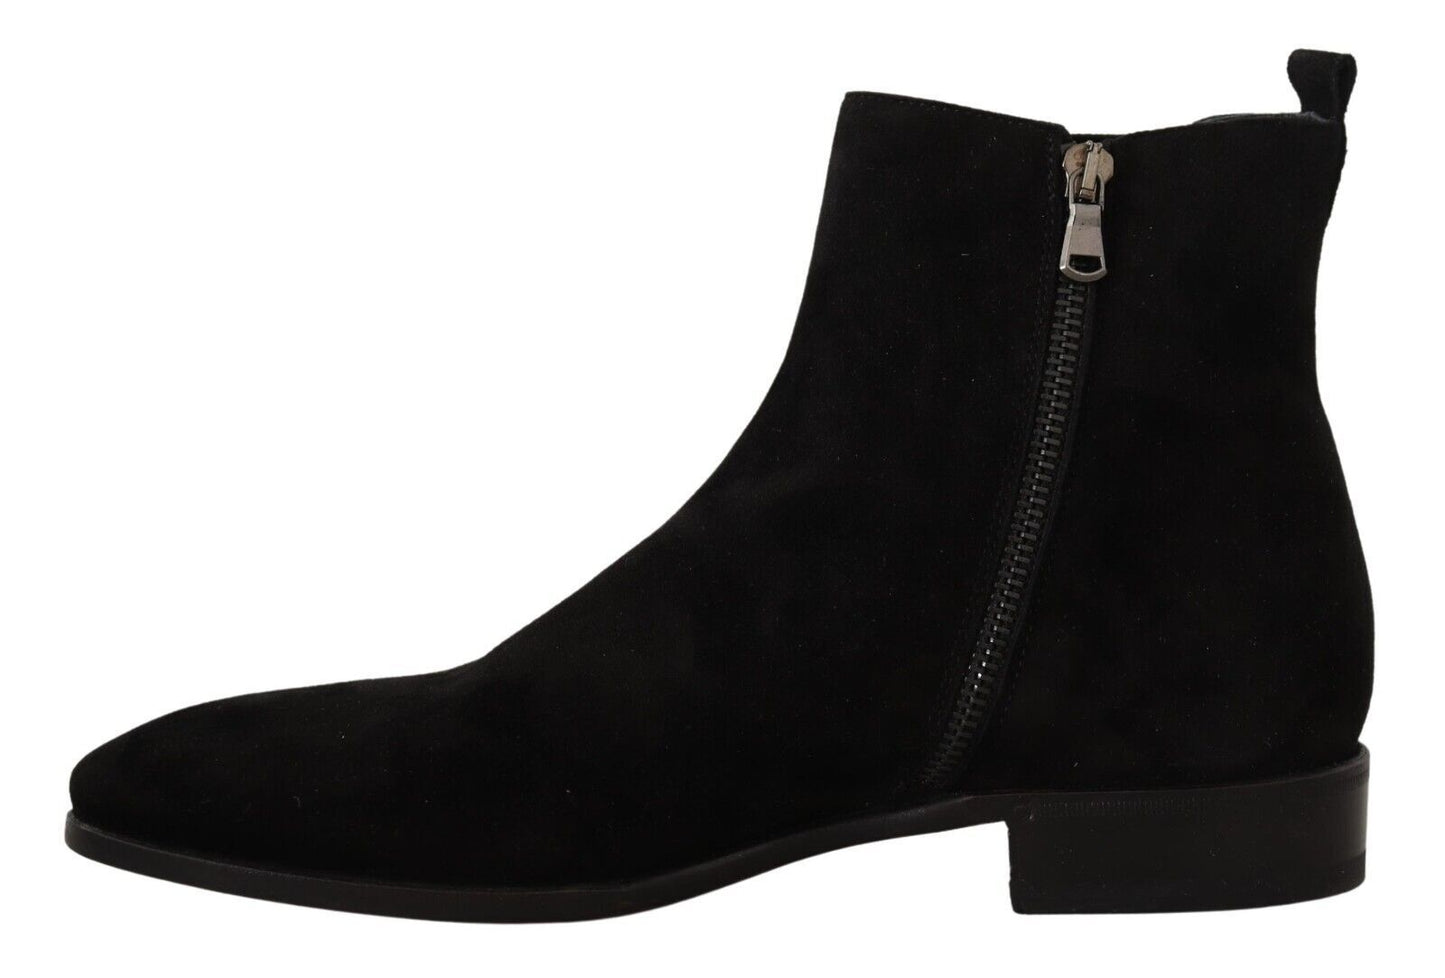 Dolce & Gabbana Black Suede Leather Chelsea Mens Boots Shoes